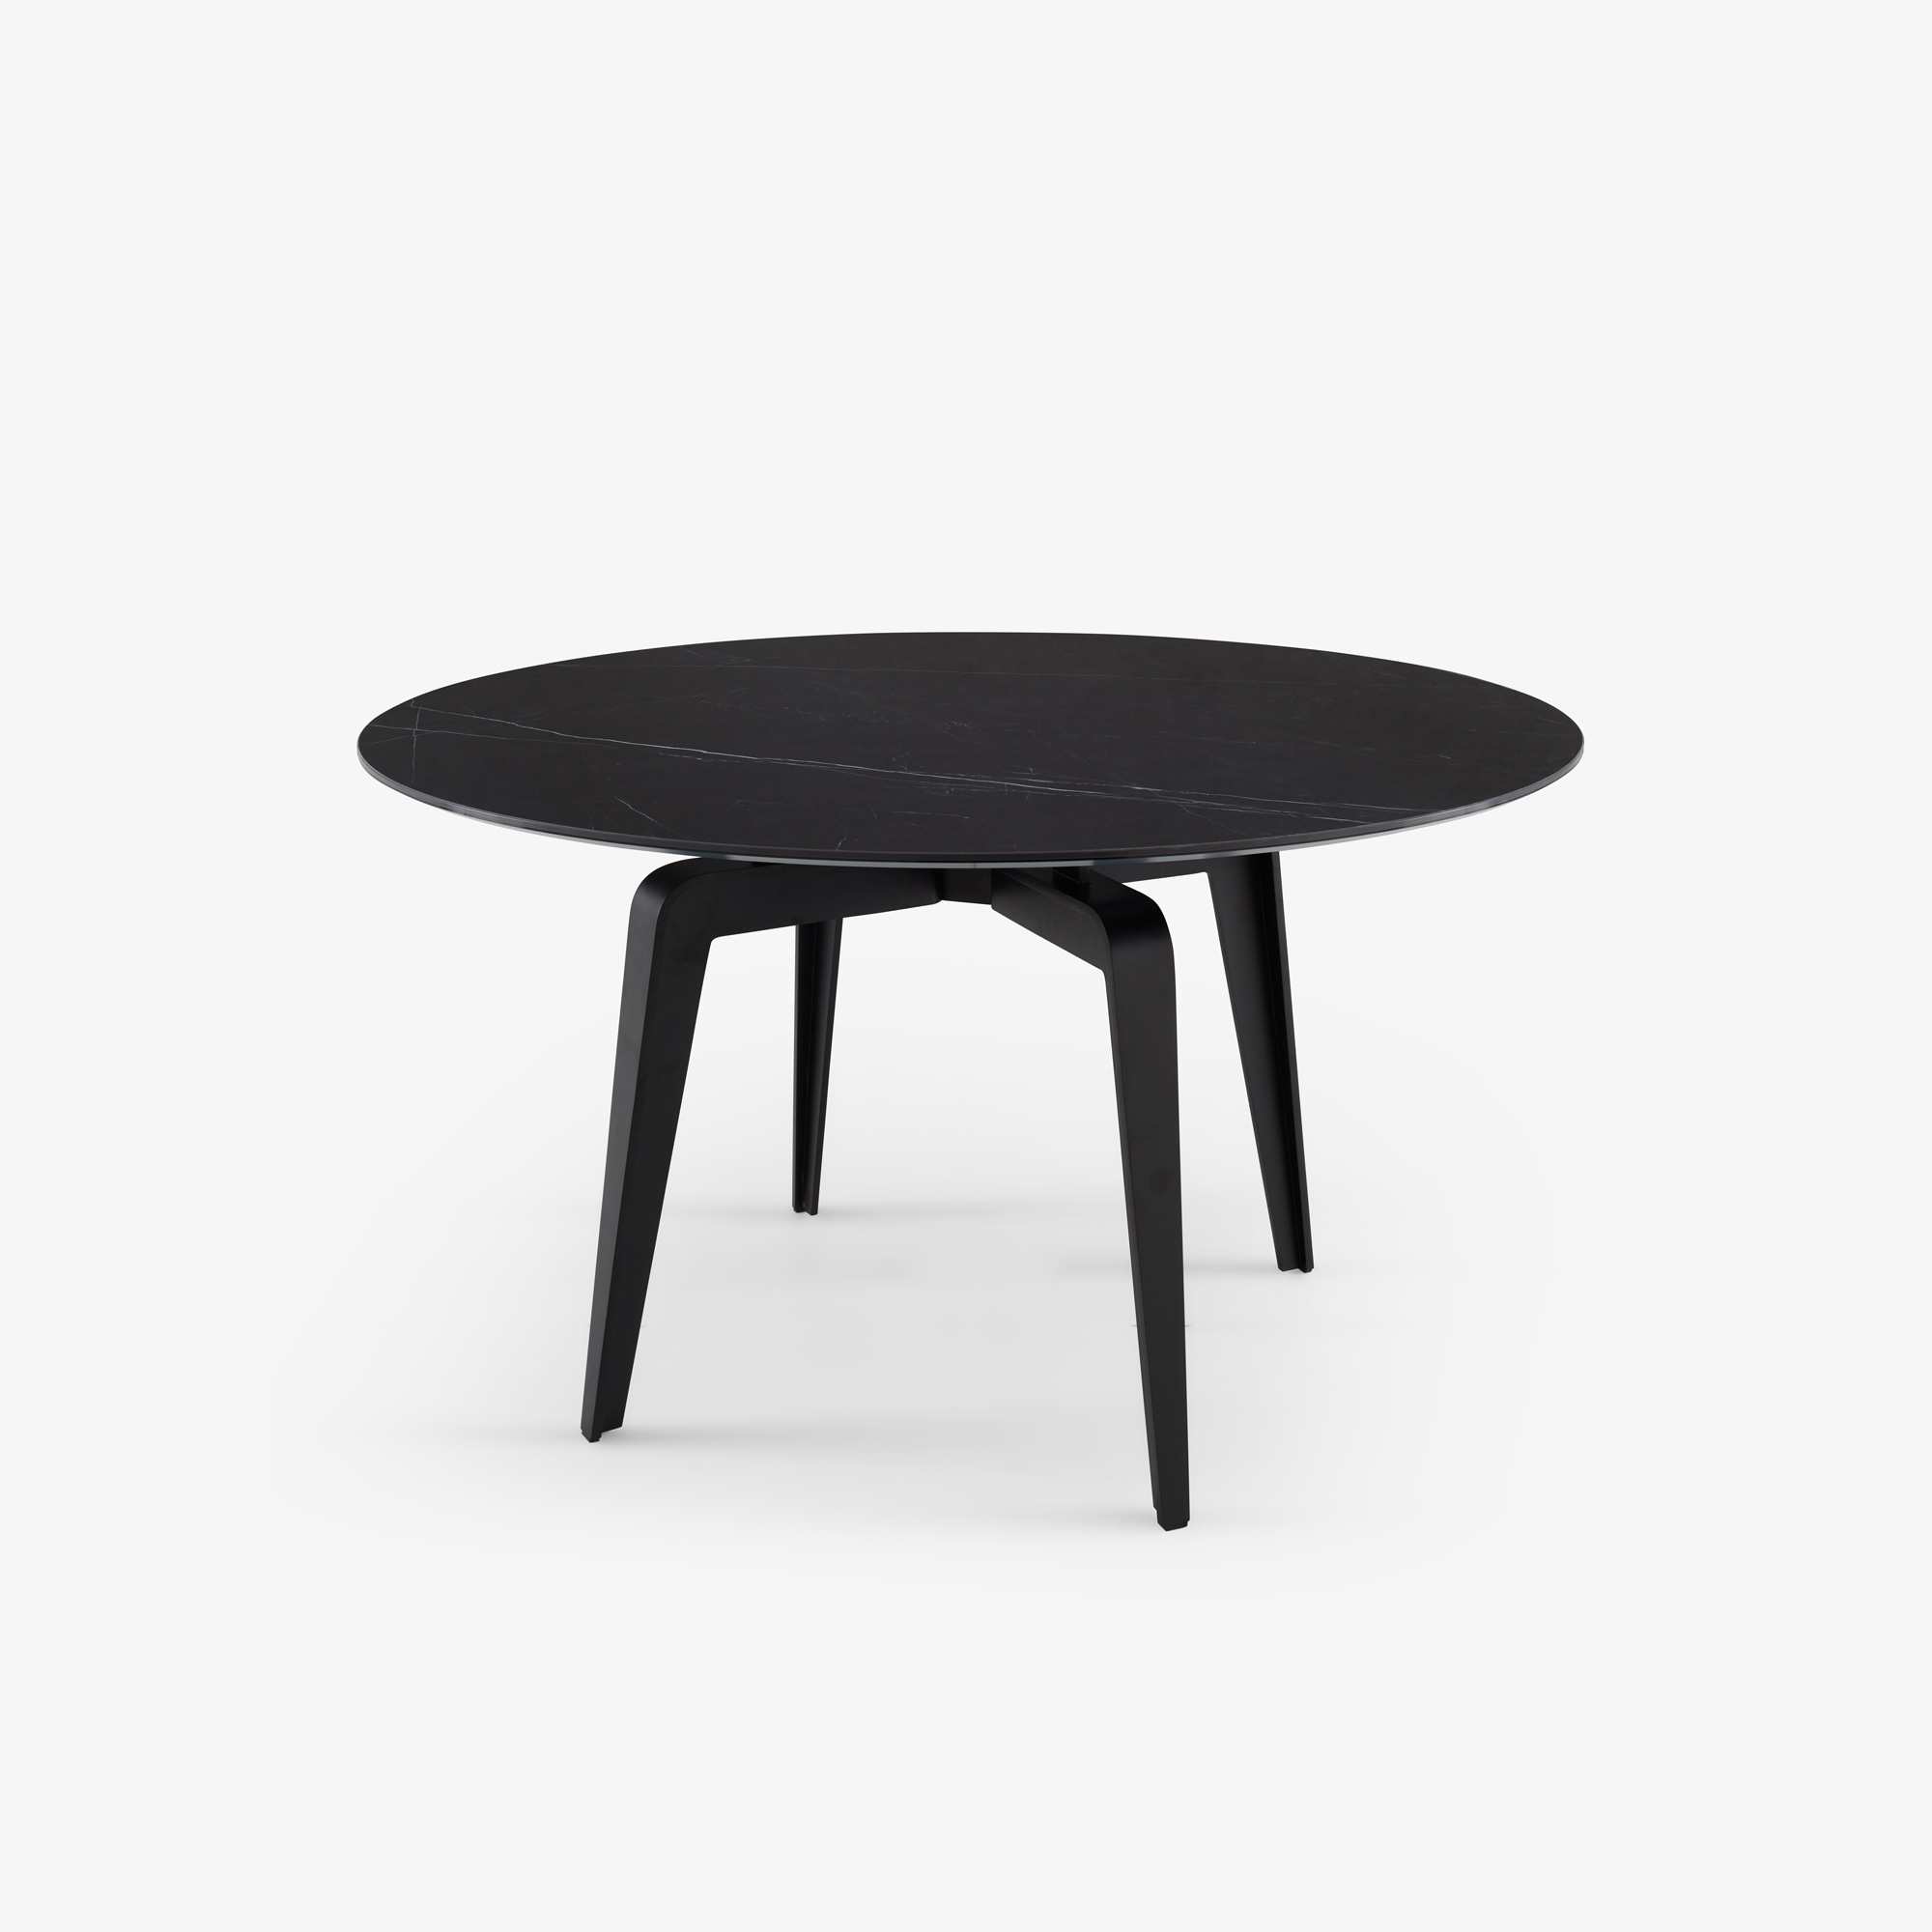 Image Round dining table black lacquered base  2